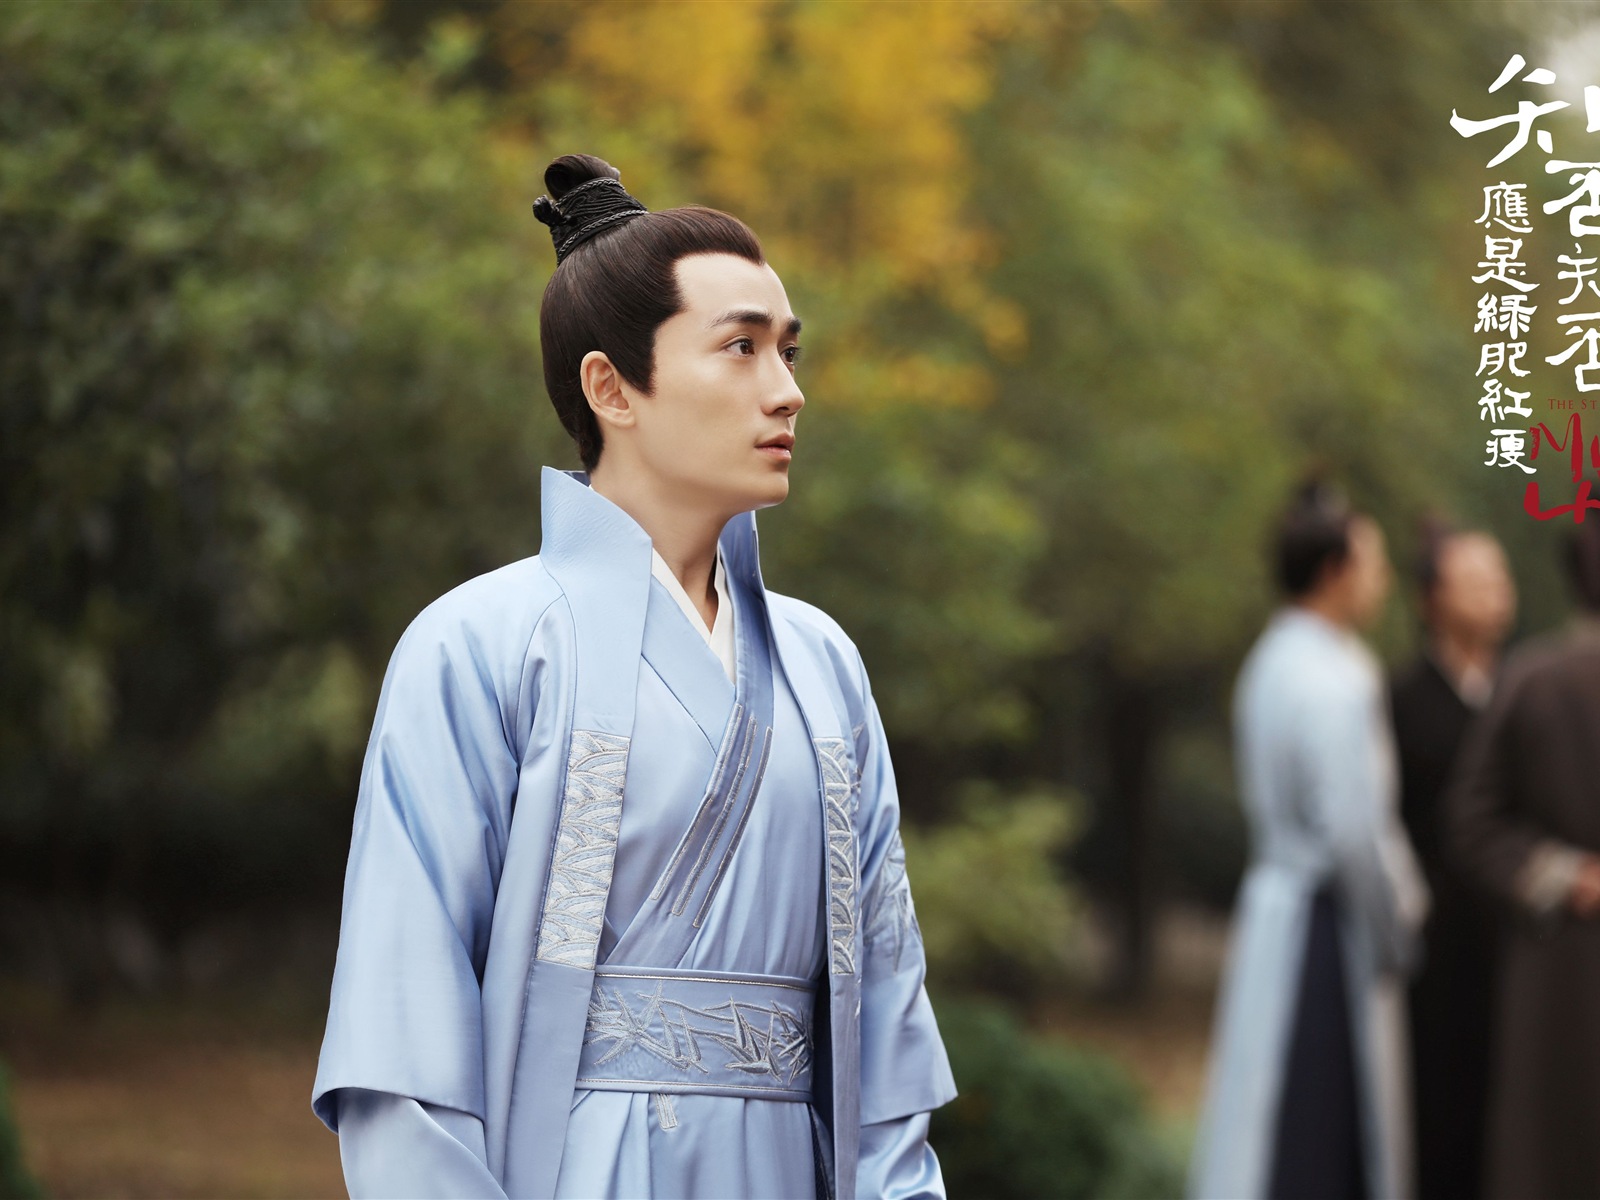 The Story Of MingLan, TV series HD wallpapers #55 - 1600x1200